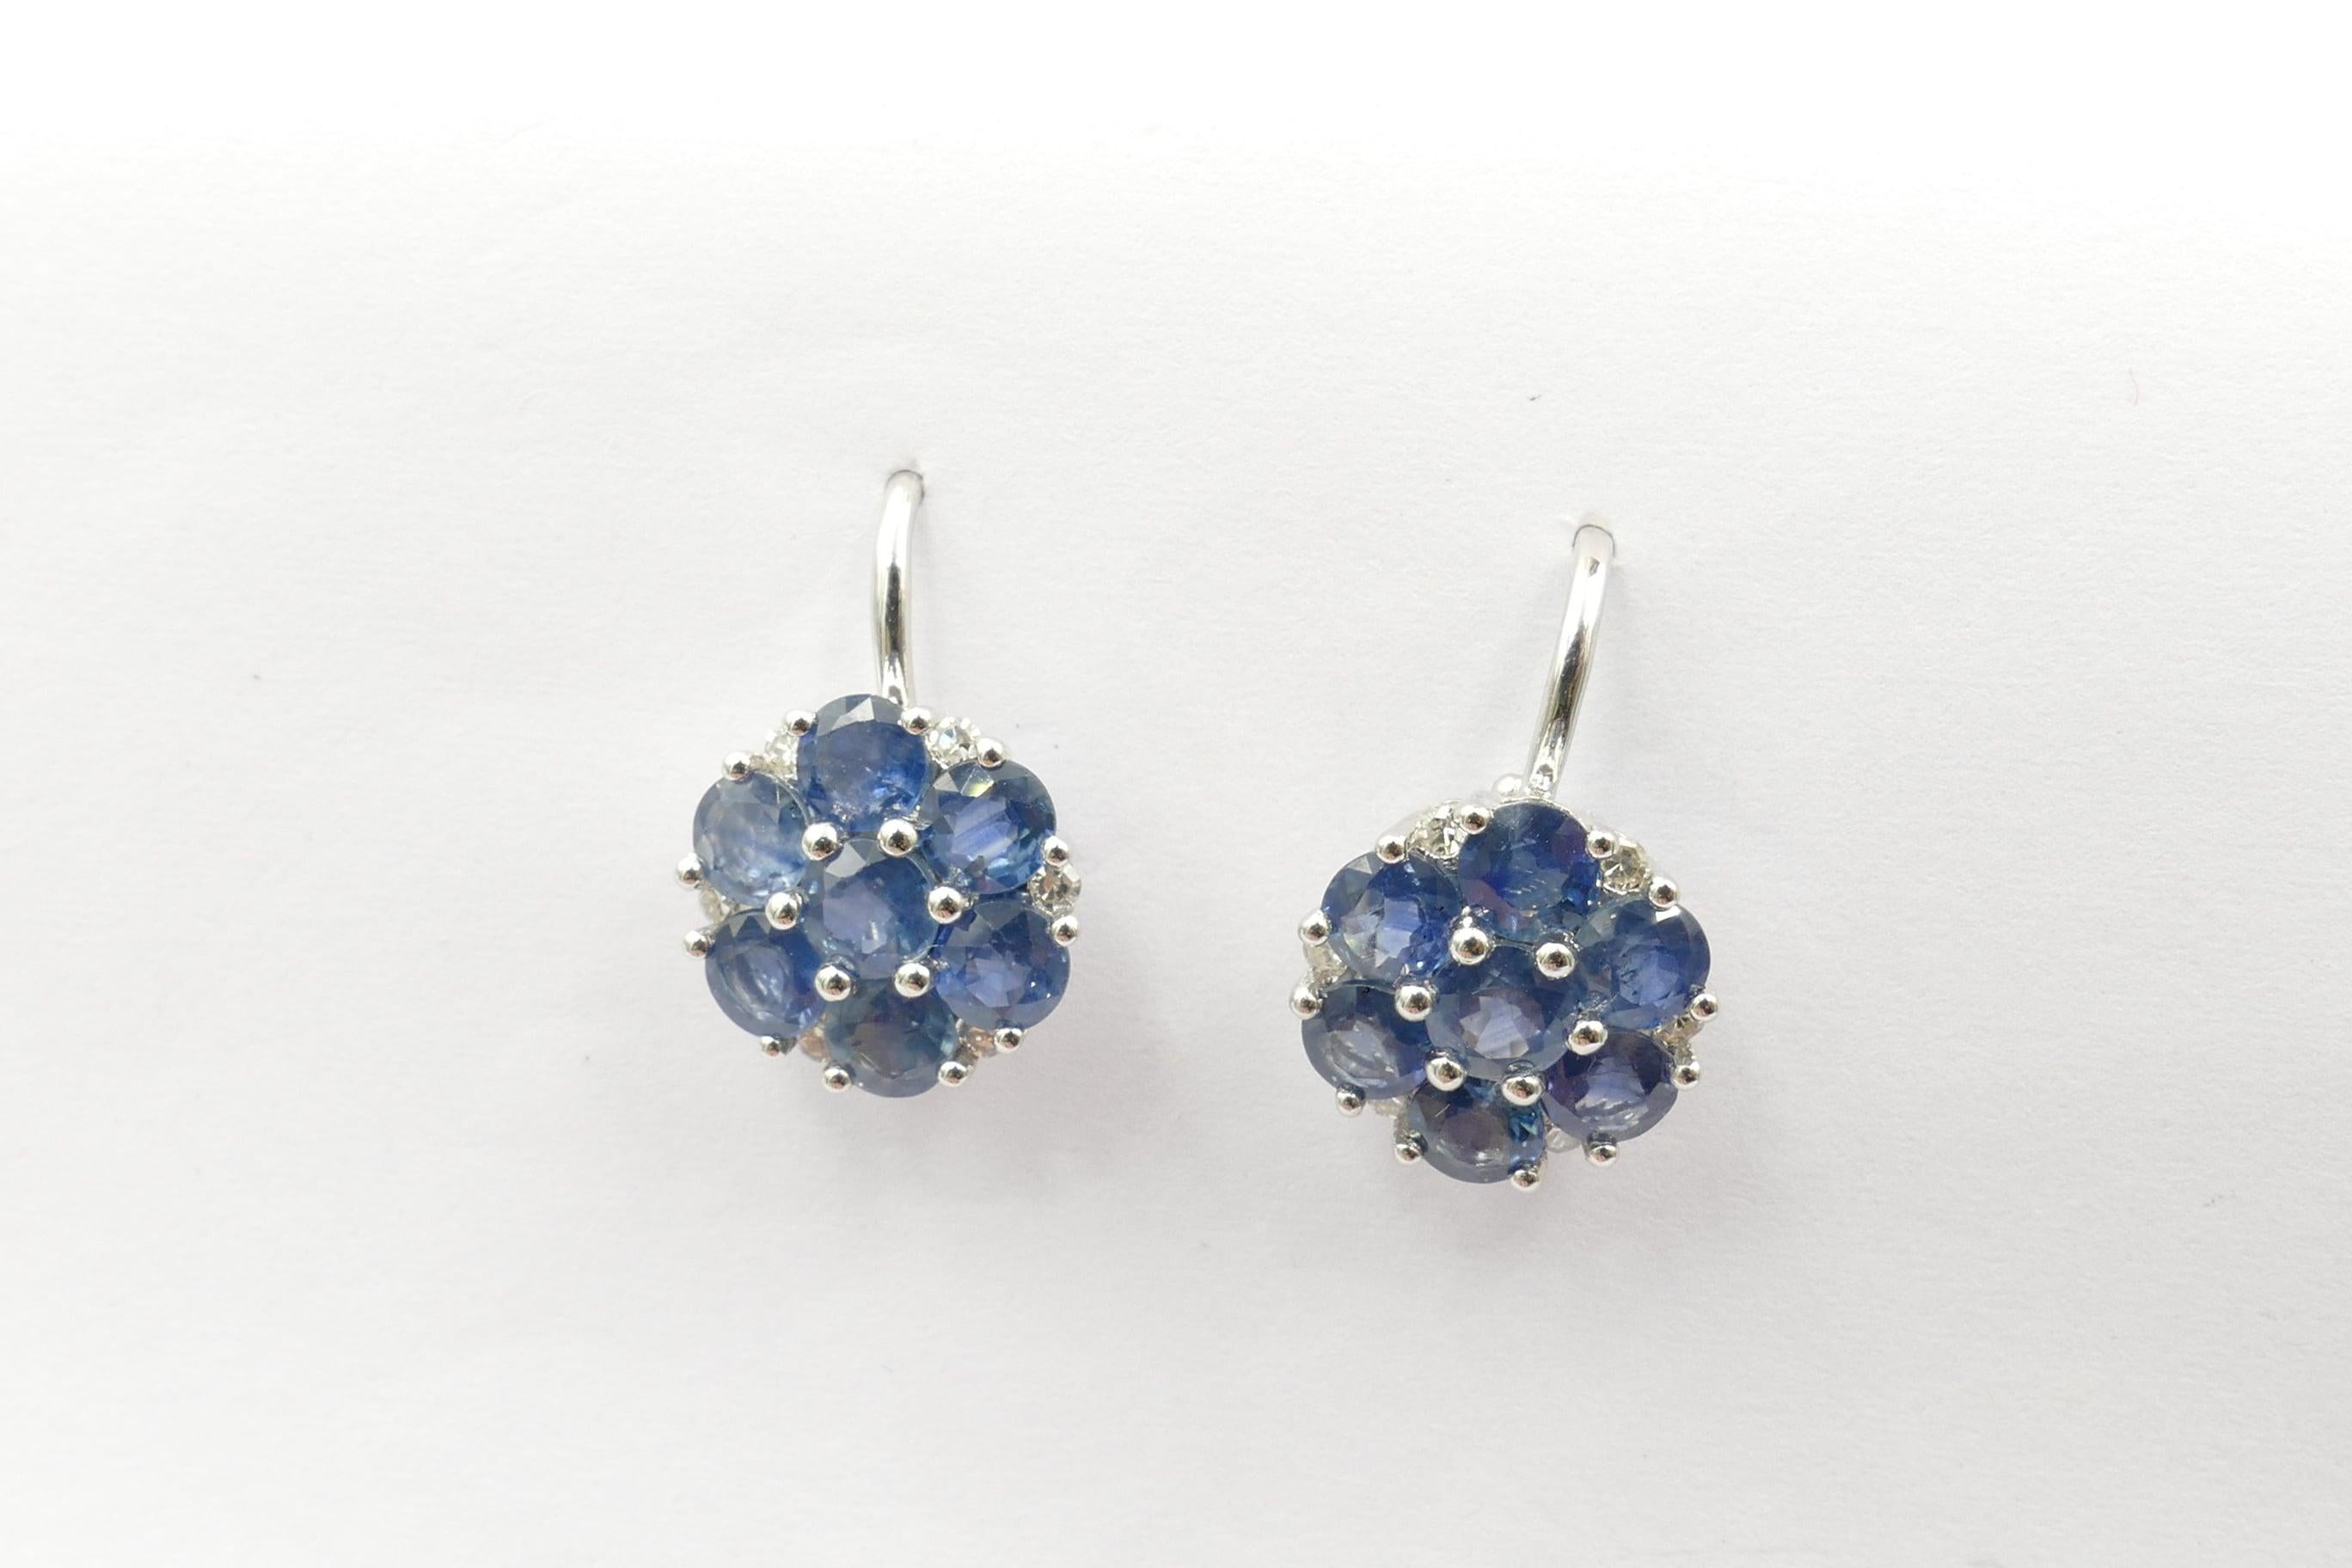 Beautiful Earrings that can be worn with any colour, day or night.
They feature 14 sapphires of mid to medium dark colour, total weight 3.75 carats, Round Cut, Shared Claw Set, along with 14 Round Brilliant Cut Diamonds Colour H-K.
The Earrings